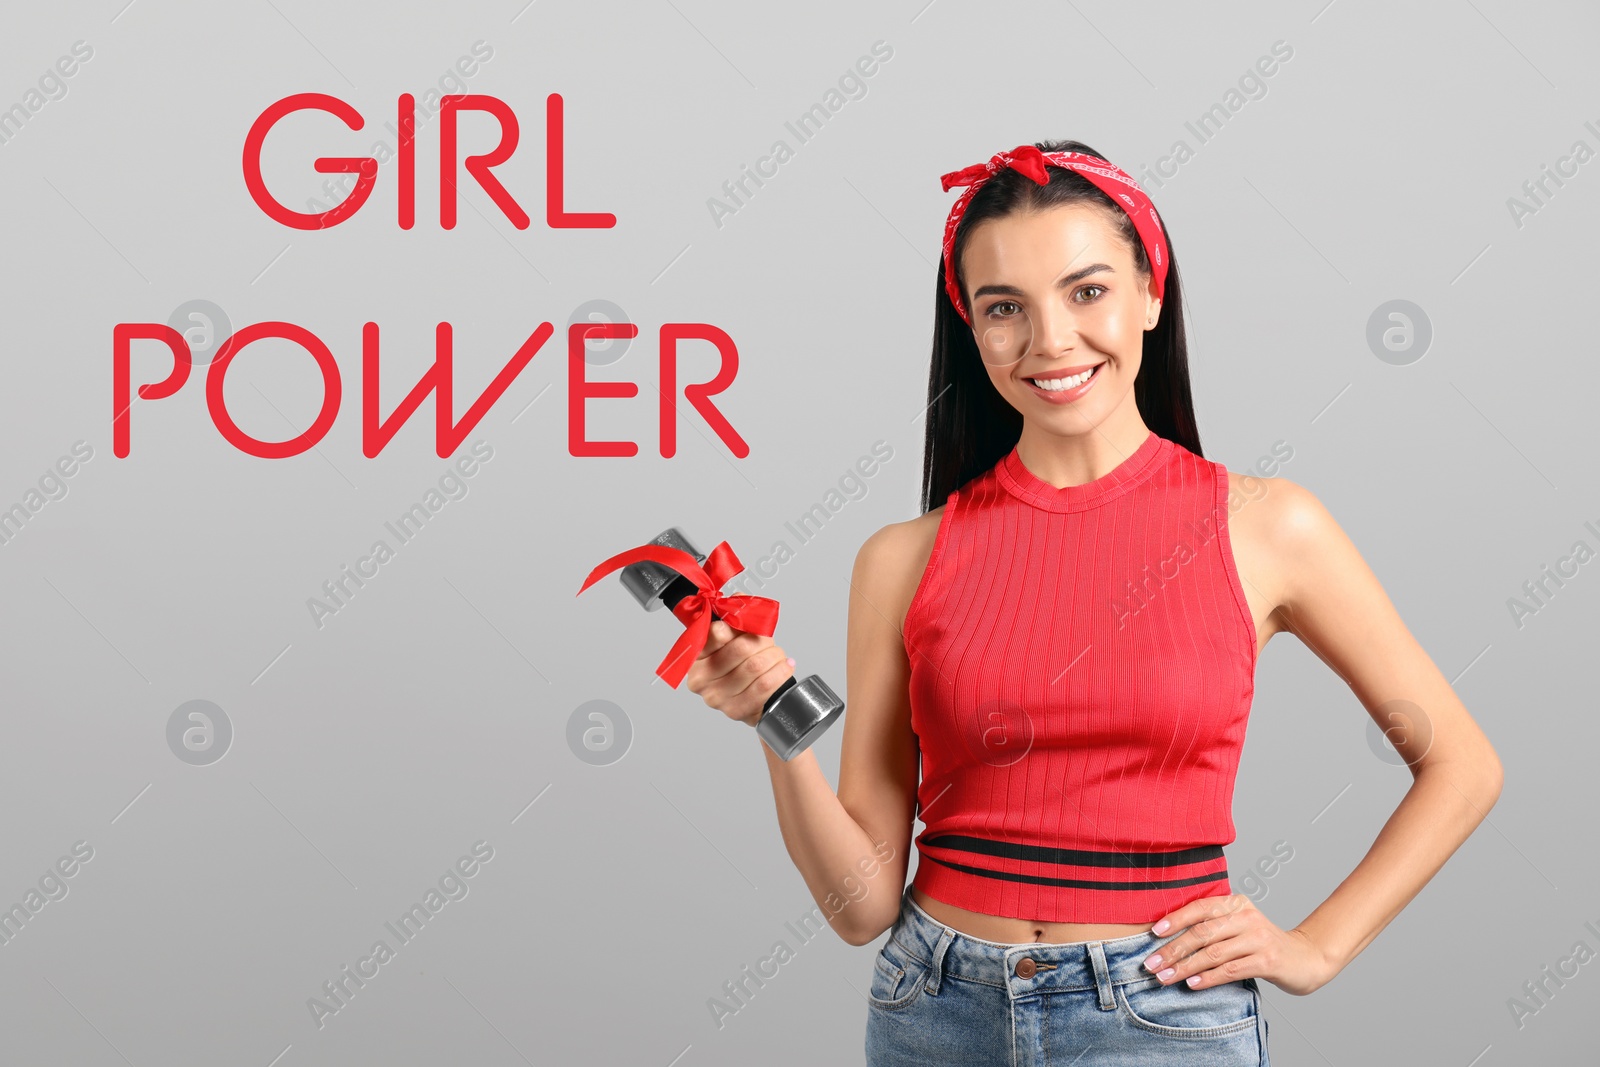 Image of 8 March greeting card. Phrase Girl Power and young woman holding dumbbell on light background